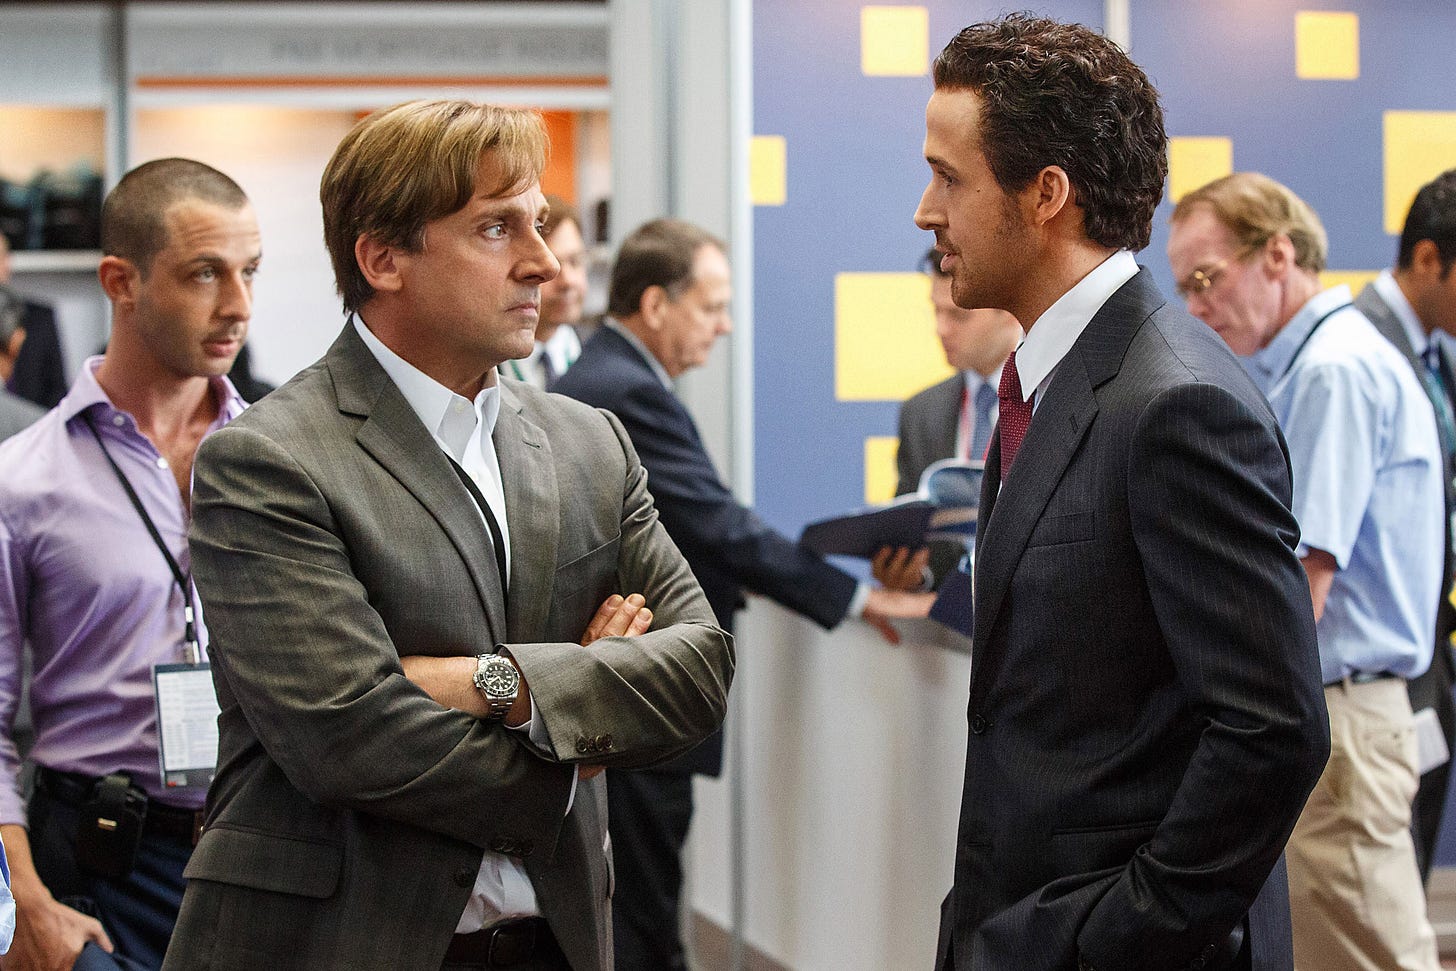 From The Big Short: Steve Carrel crosses his arms and looks perturbed at Ryan Gosling, who looks like he's got a golden ticket.